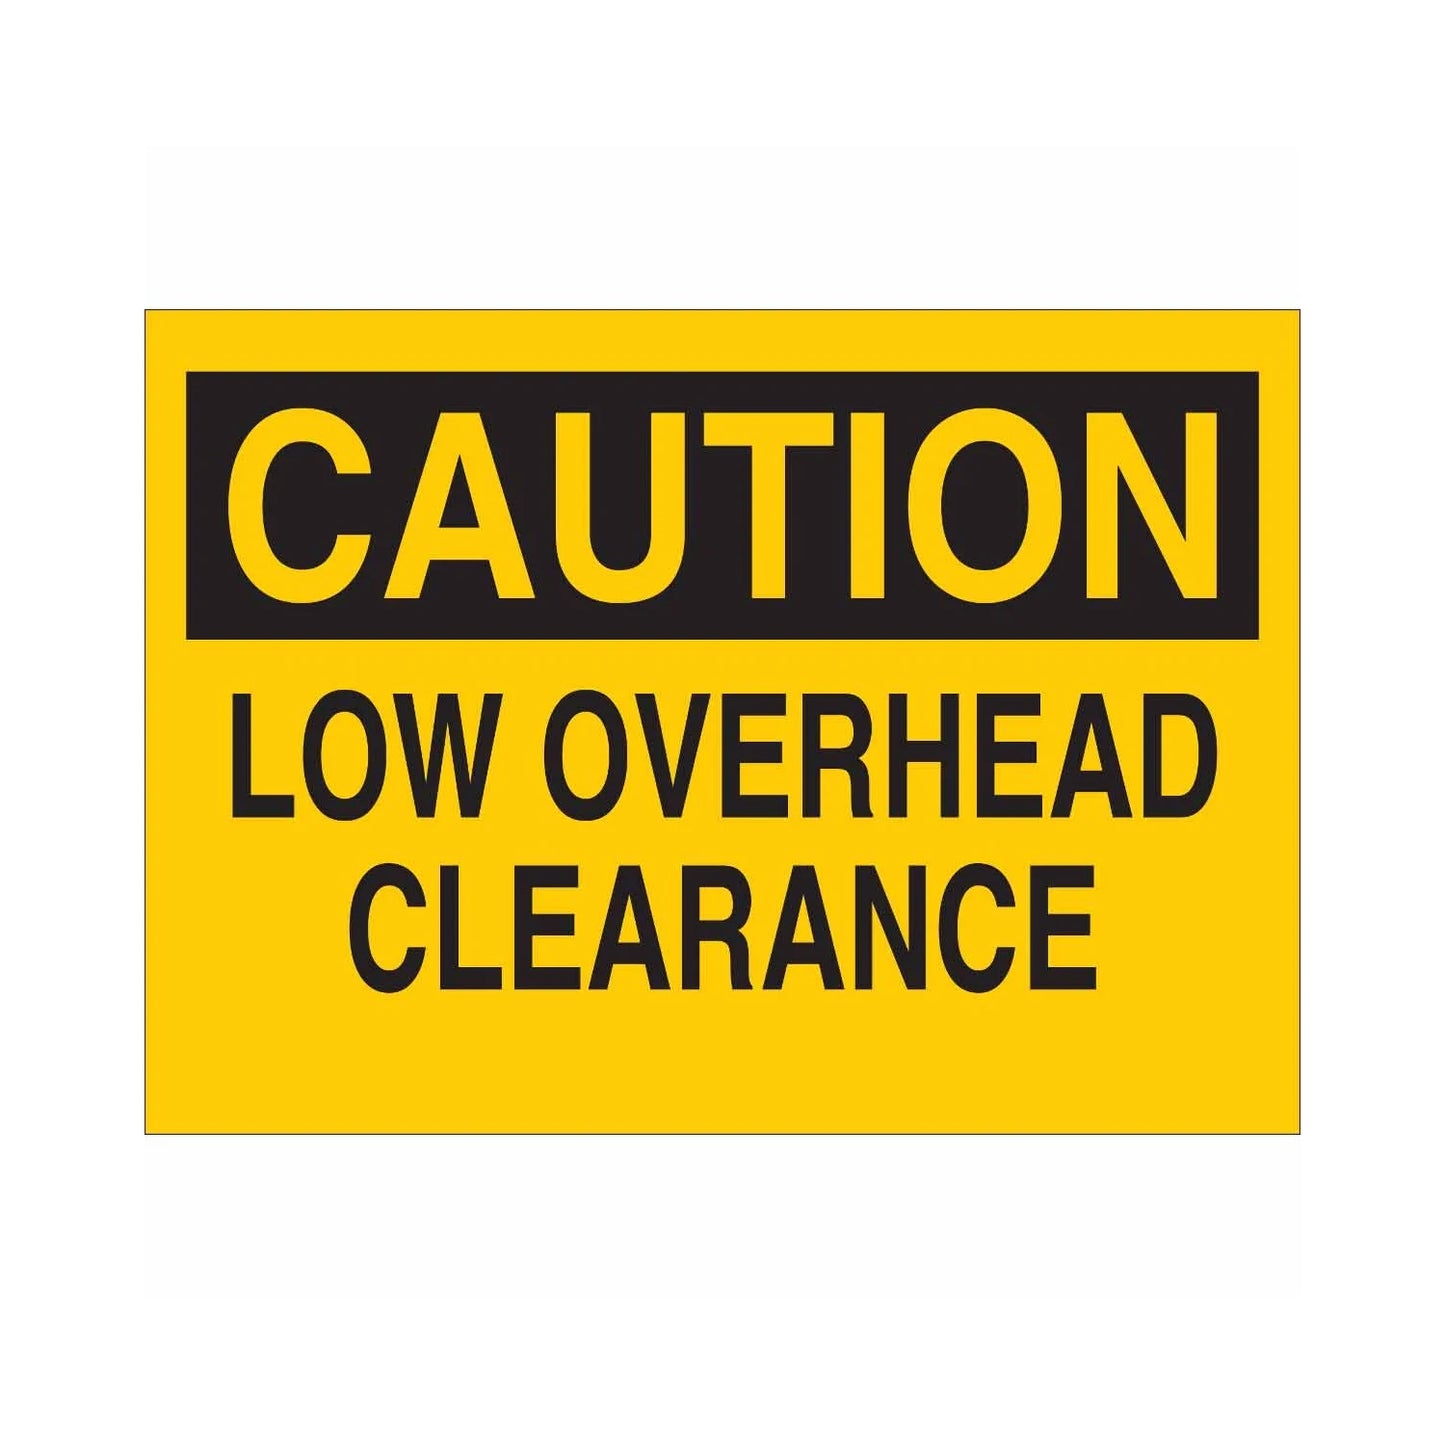 CAUTION Low Overhead Clearance sign